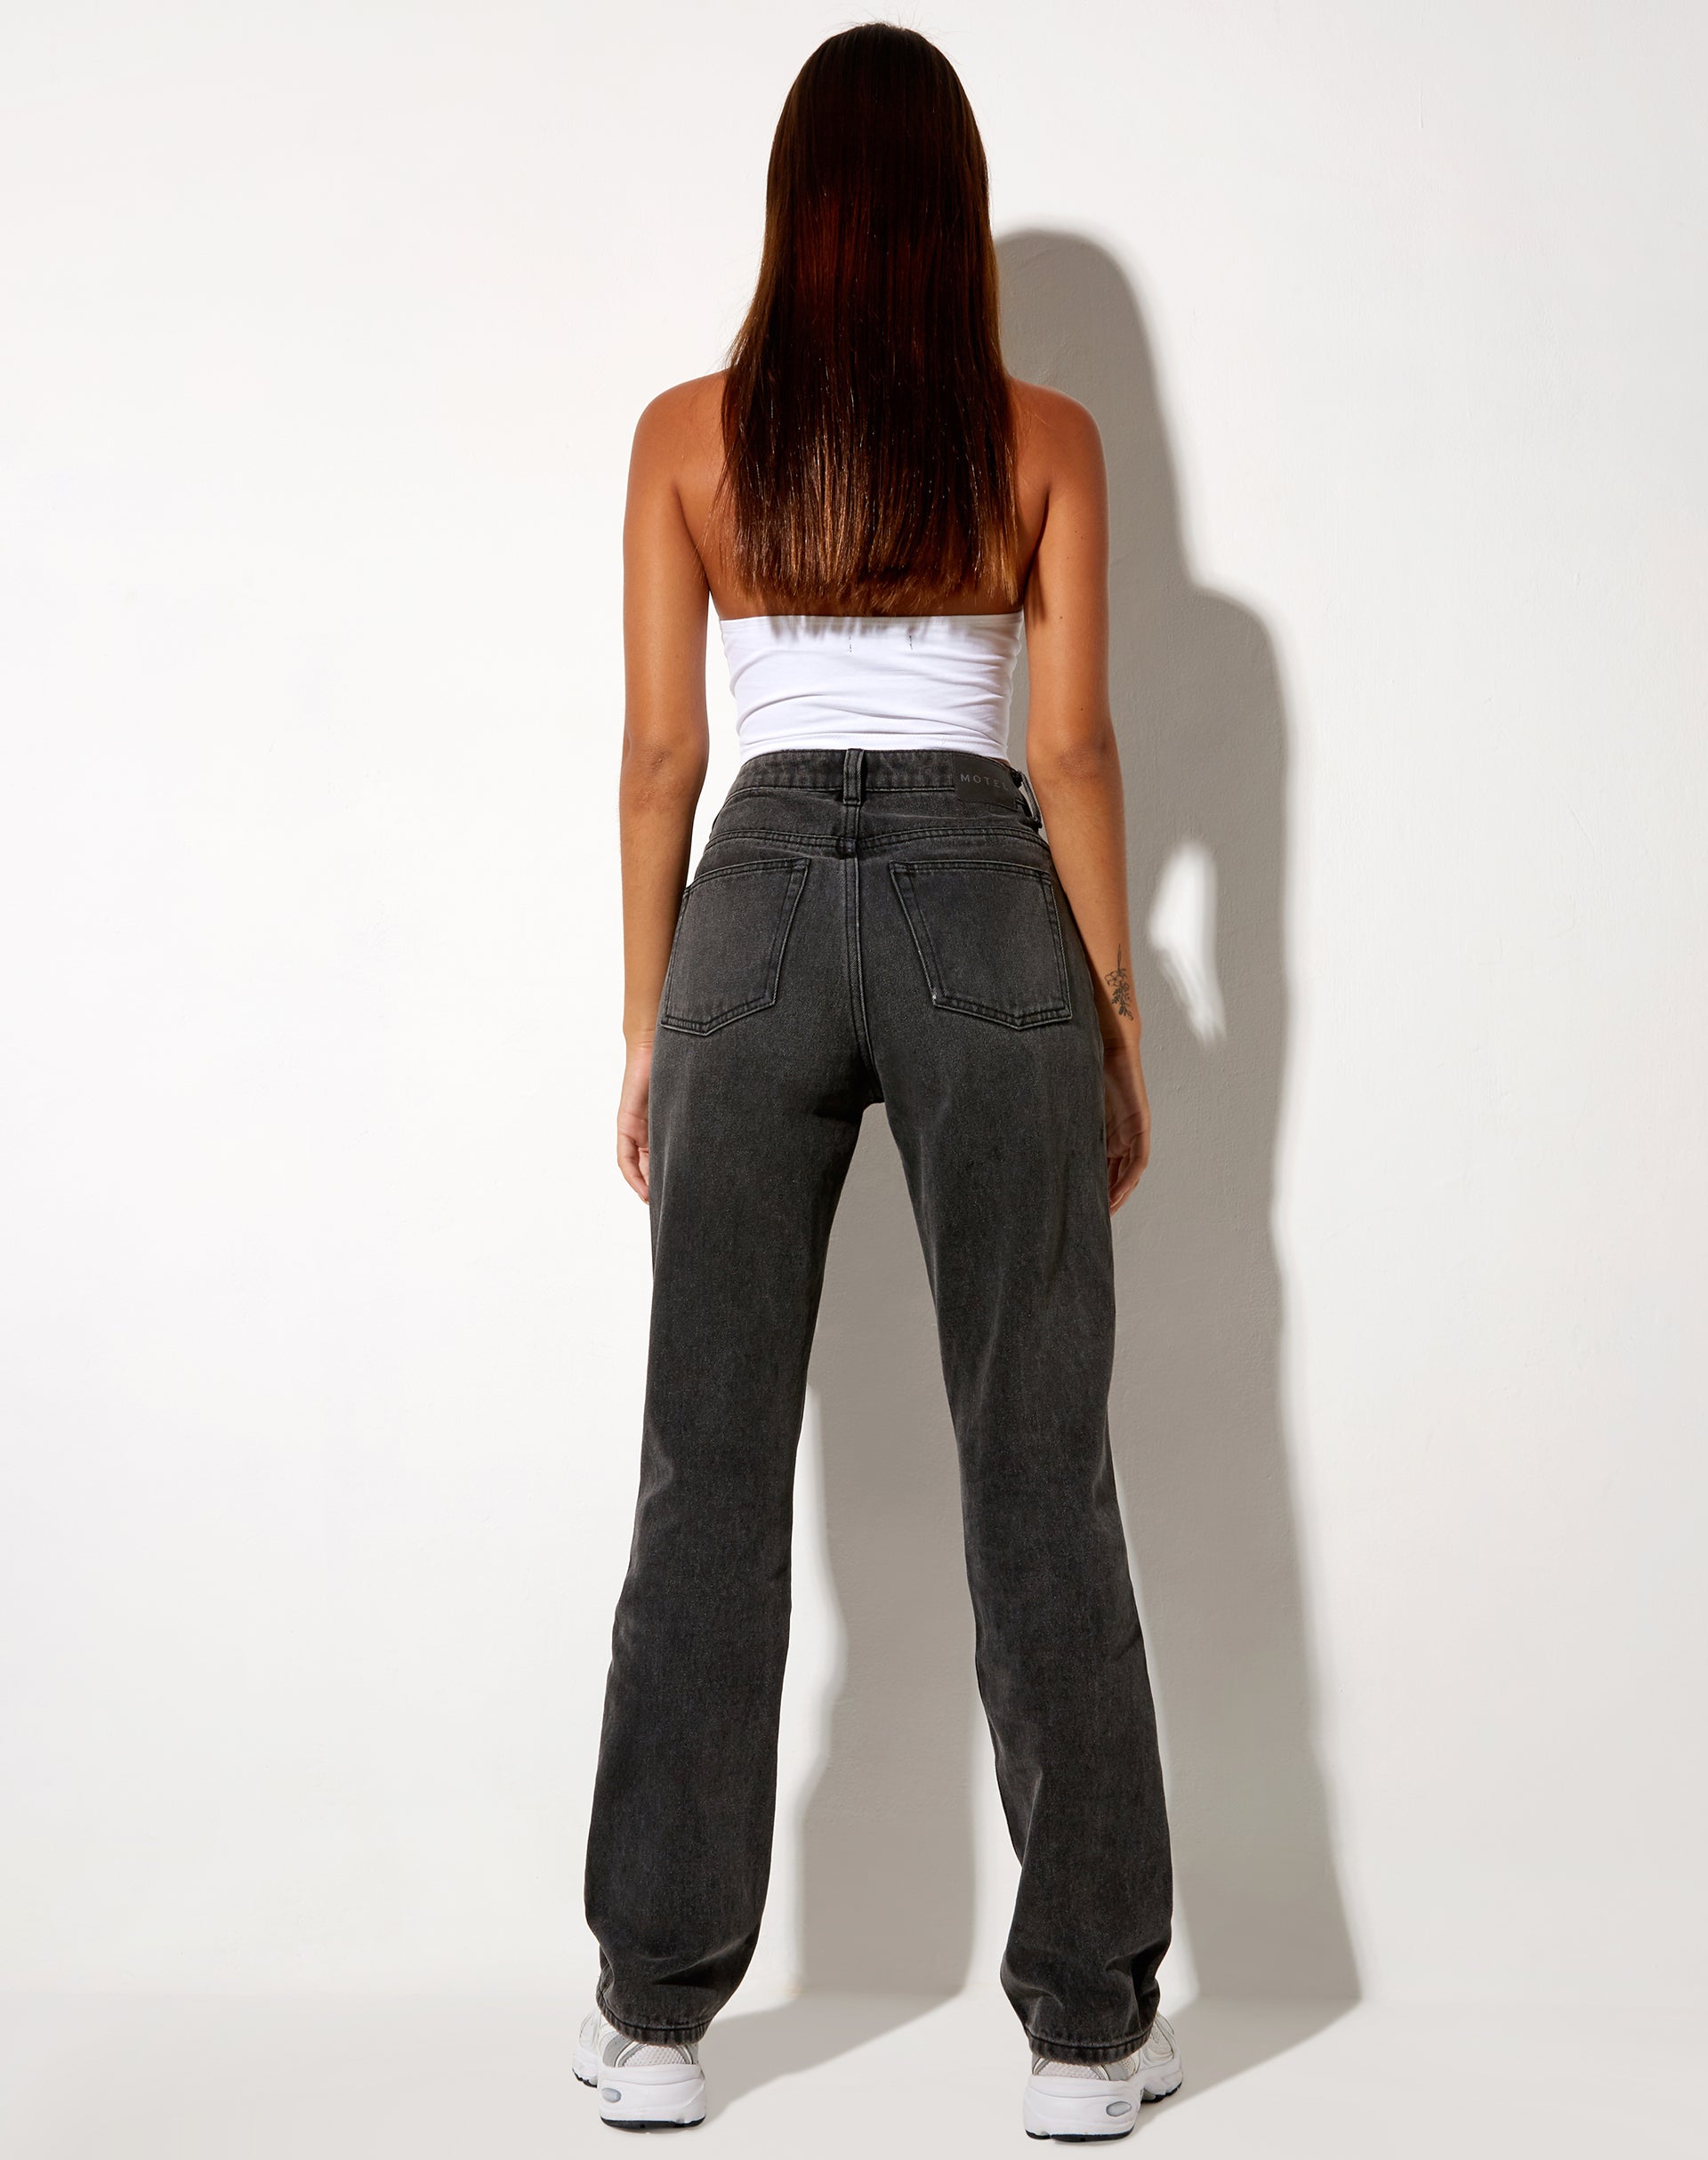 Image of Jess Jeans in Black Wash